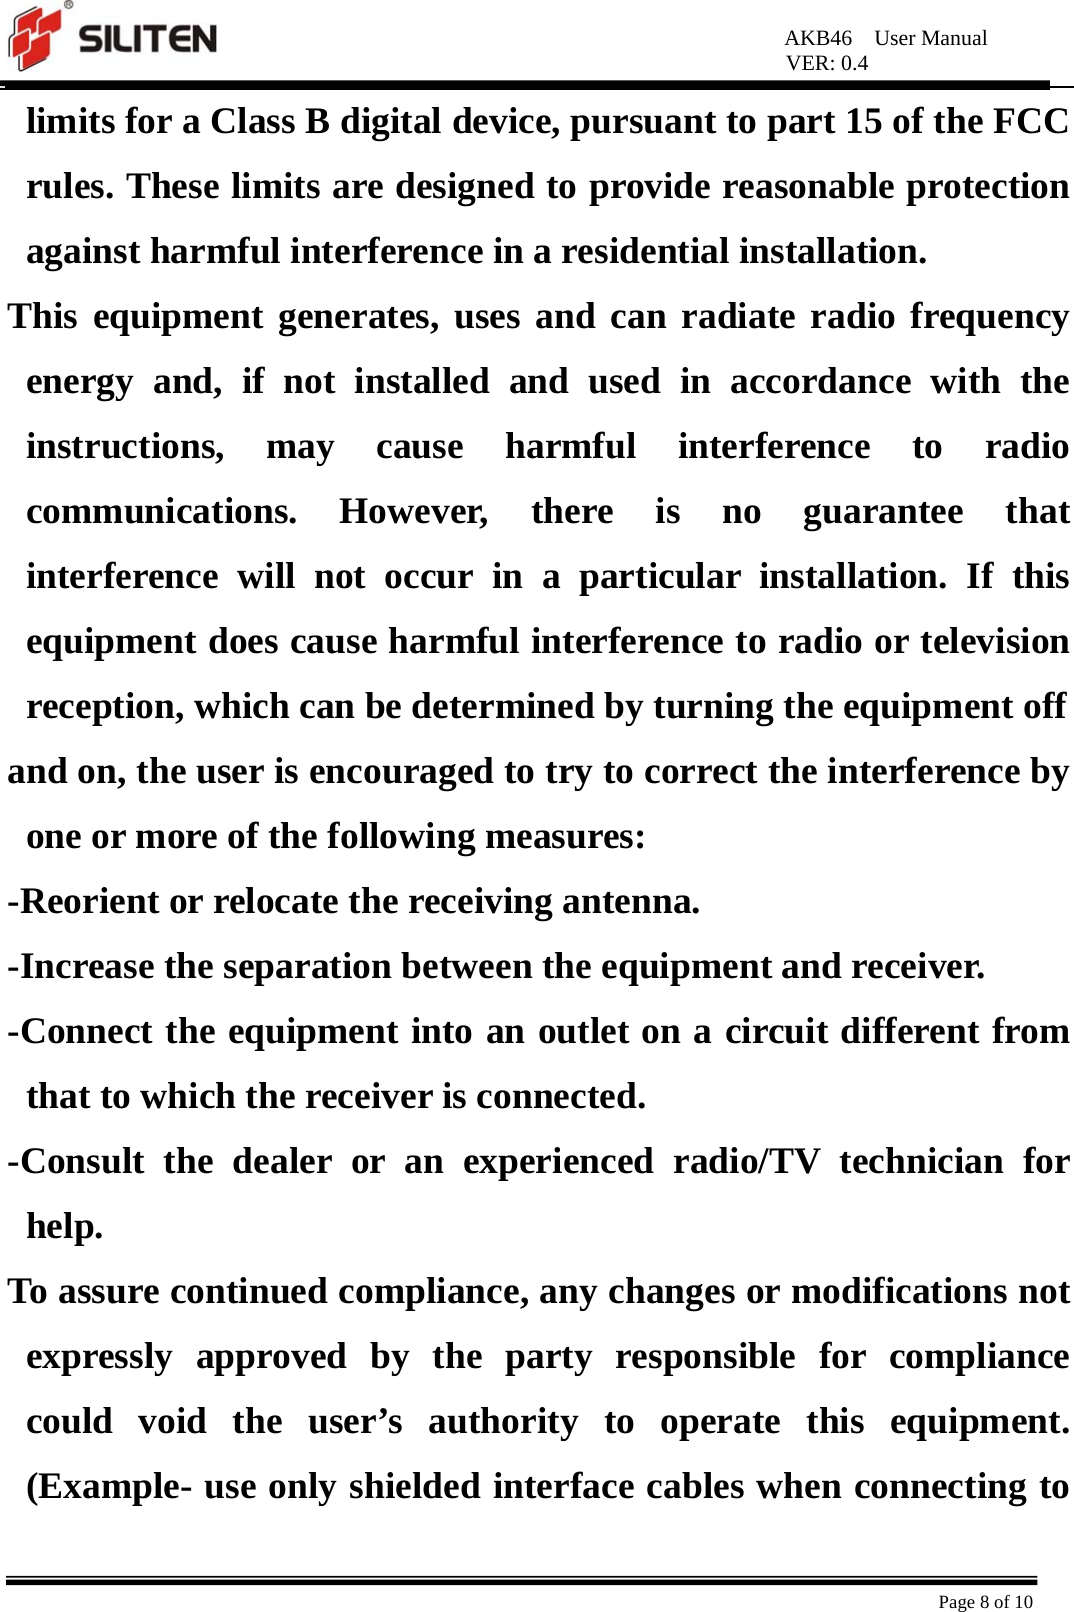 AKB46  User Manual VER: 0.4  Page 8 of 10 limits for a Class B digital device, pursuant to part 15 of the FCC rules. These limits are designed to provide reasonable protection against harmful interference in a residential installation.   This equipment generates, uses and can radiate radio frequency energy and, if not installed and used in accordance with the instructions, may cause harmful interference to radio communications. However, there is no guarantee that interference will not occur in a particular installation. If this equipment does cause harmful interference to radio or television reception, which can be determined by turning the equipment off   and on, the user is encouraged to try to correct the interference by one or more of the following measures:   -Reorient or relocate the receiving antenna.   -Increase the separation between the equipment and receiver.   -Connect the equipment into an outlet on a circuit different from that to which the receiver is connected.   -Consult the dealer or an experienced radio/TV technician for help.  To assure continued compliance, any changes or modifications not expressly approved by the party responsible for compliance could void the user’s authority to operate this equipment. (Example- use only shielded interface cables when connecting to 